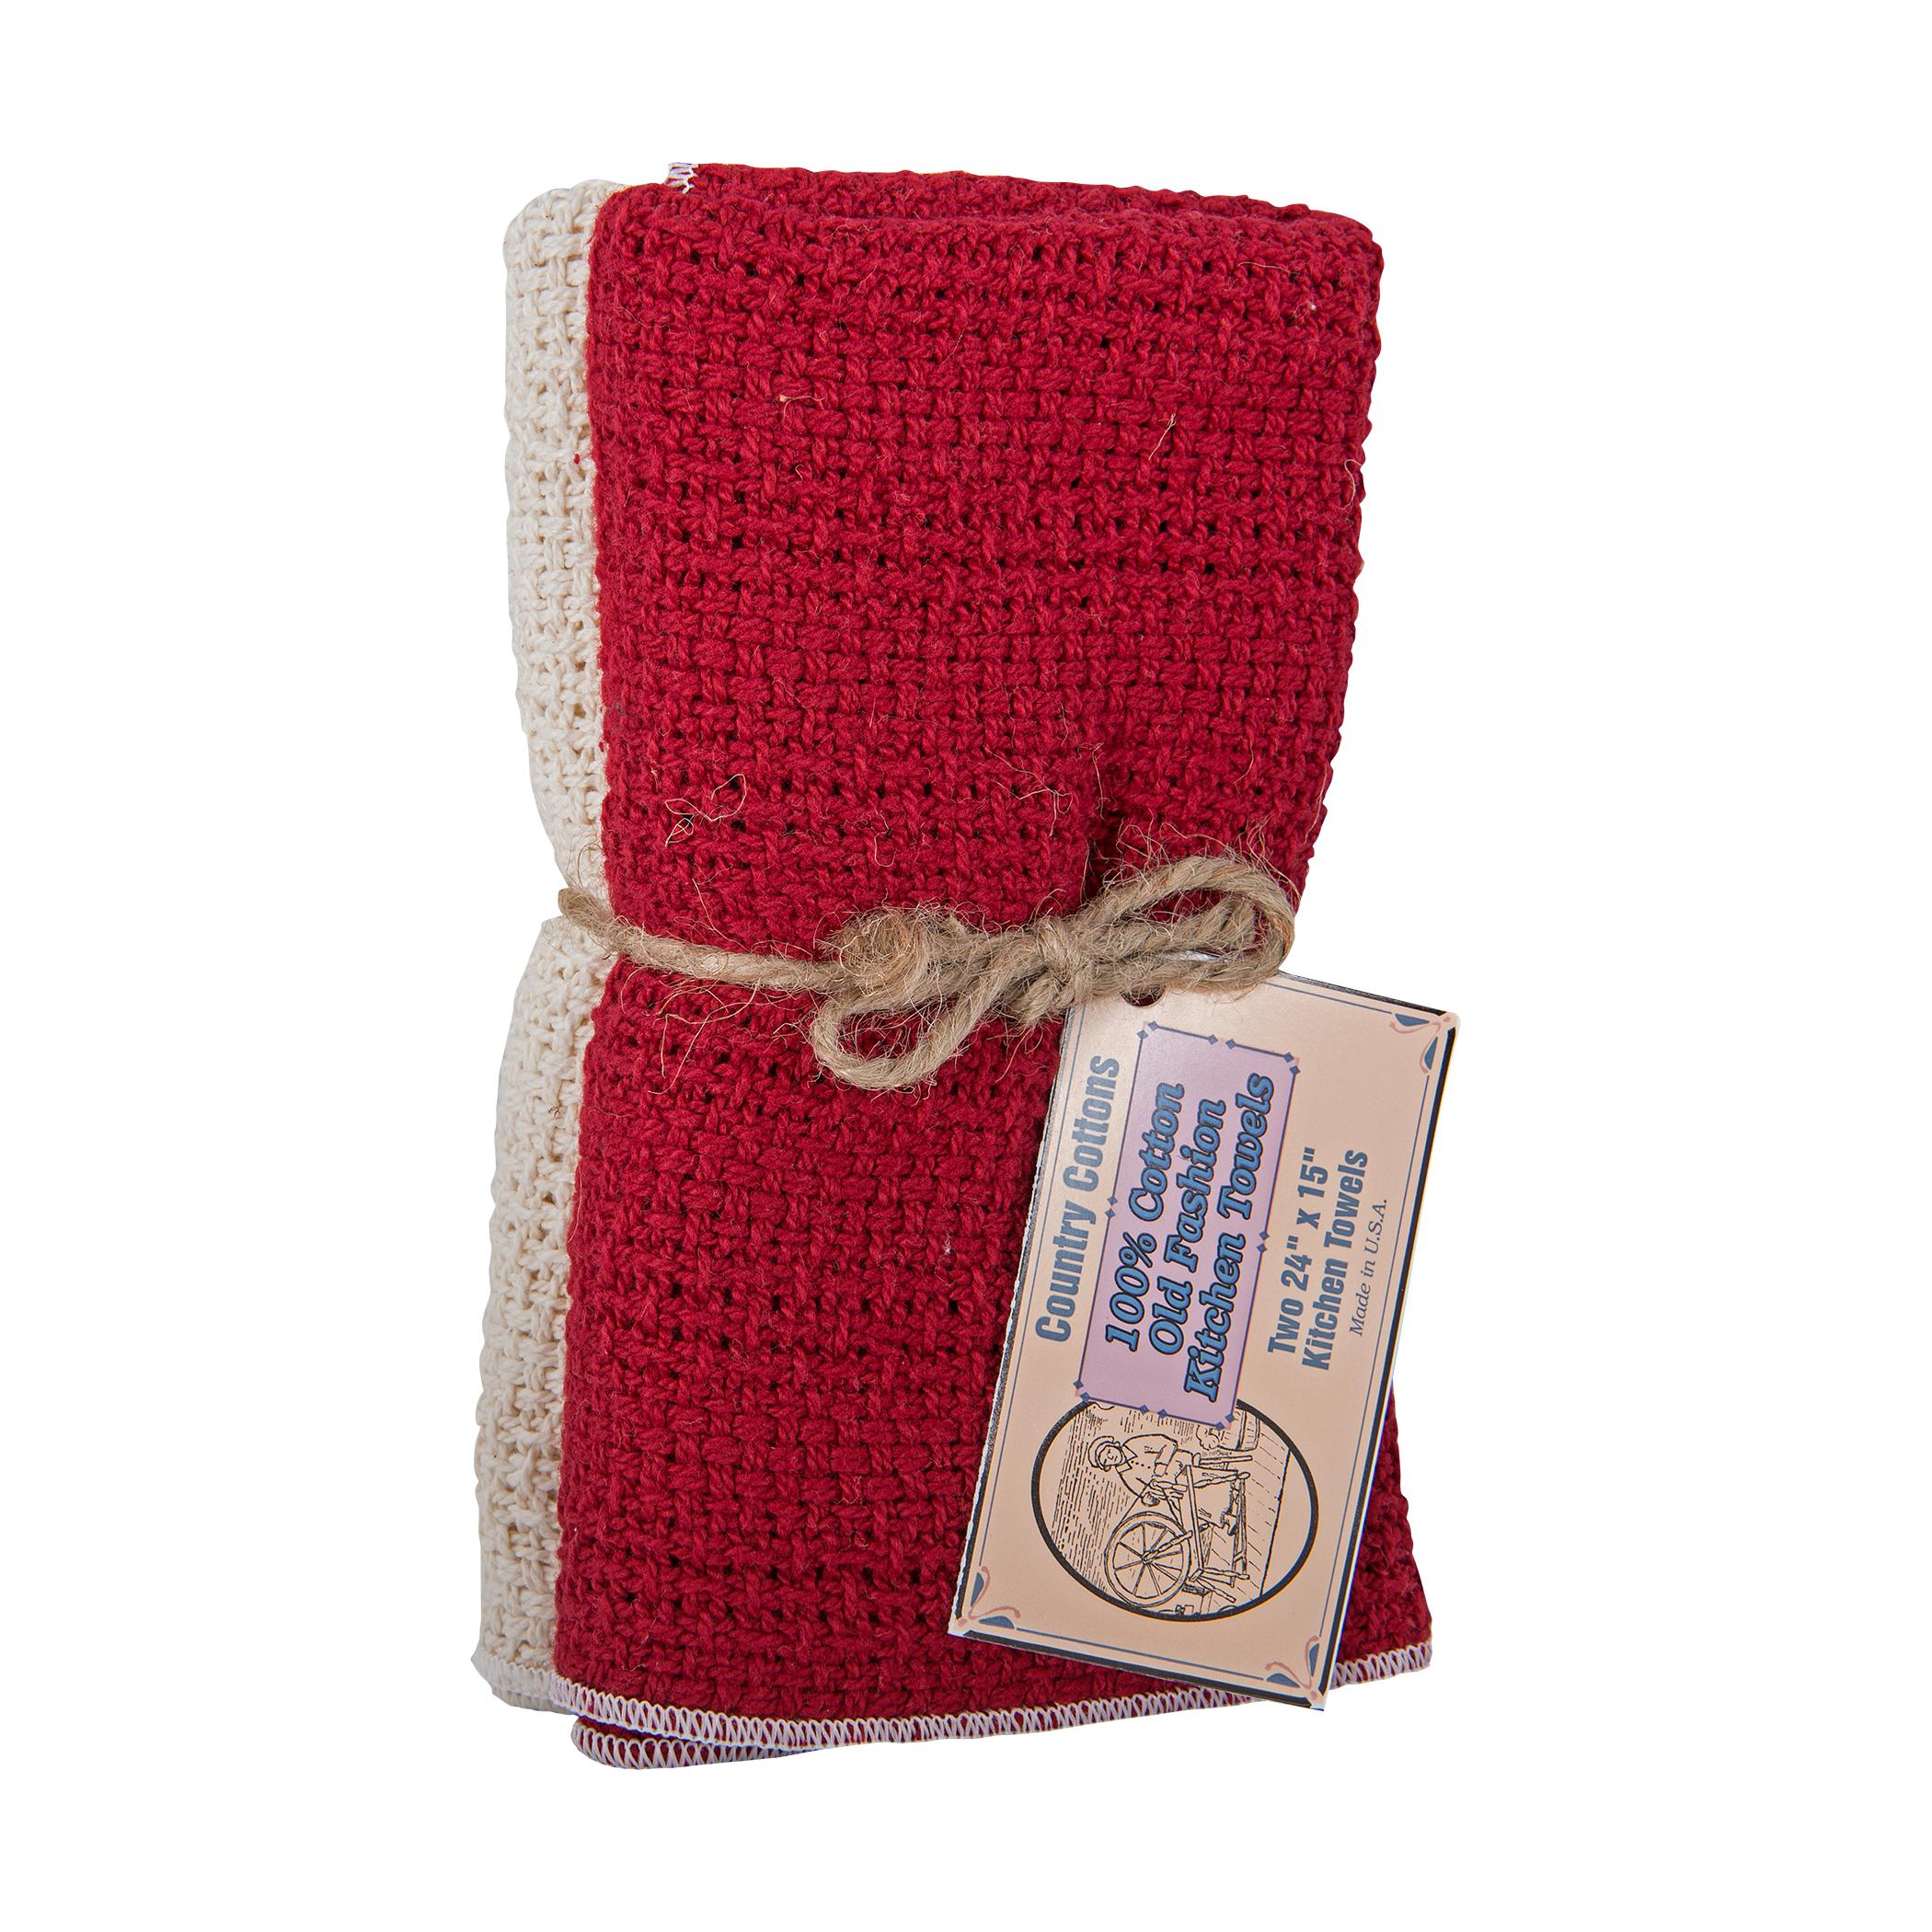 Country Cottons:: made in USA 100% cotton dishcloths and kitchen towels--high  quality